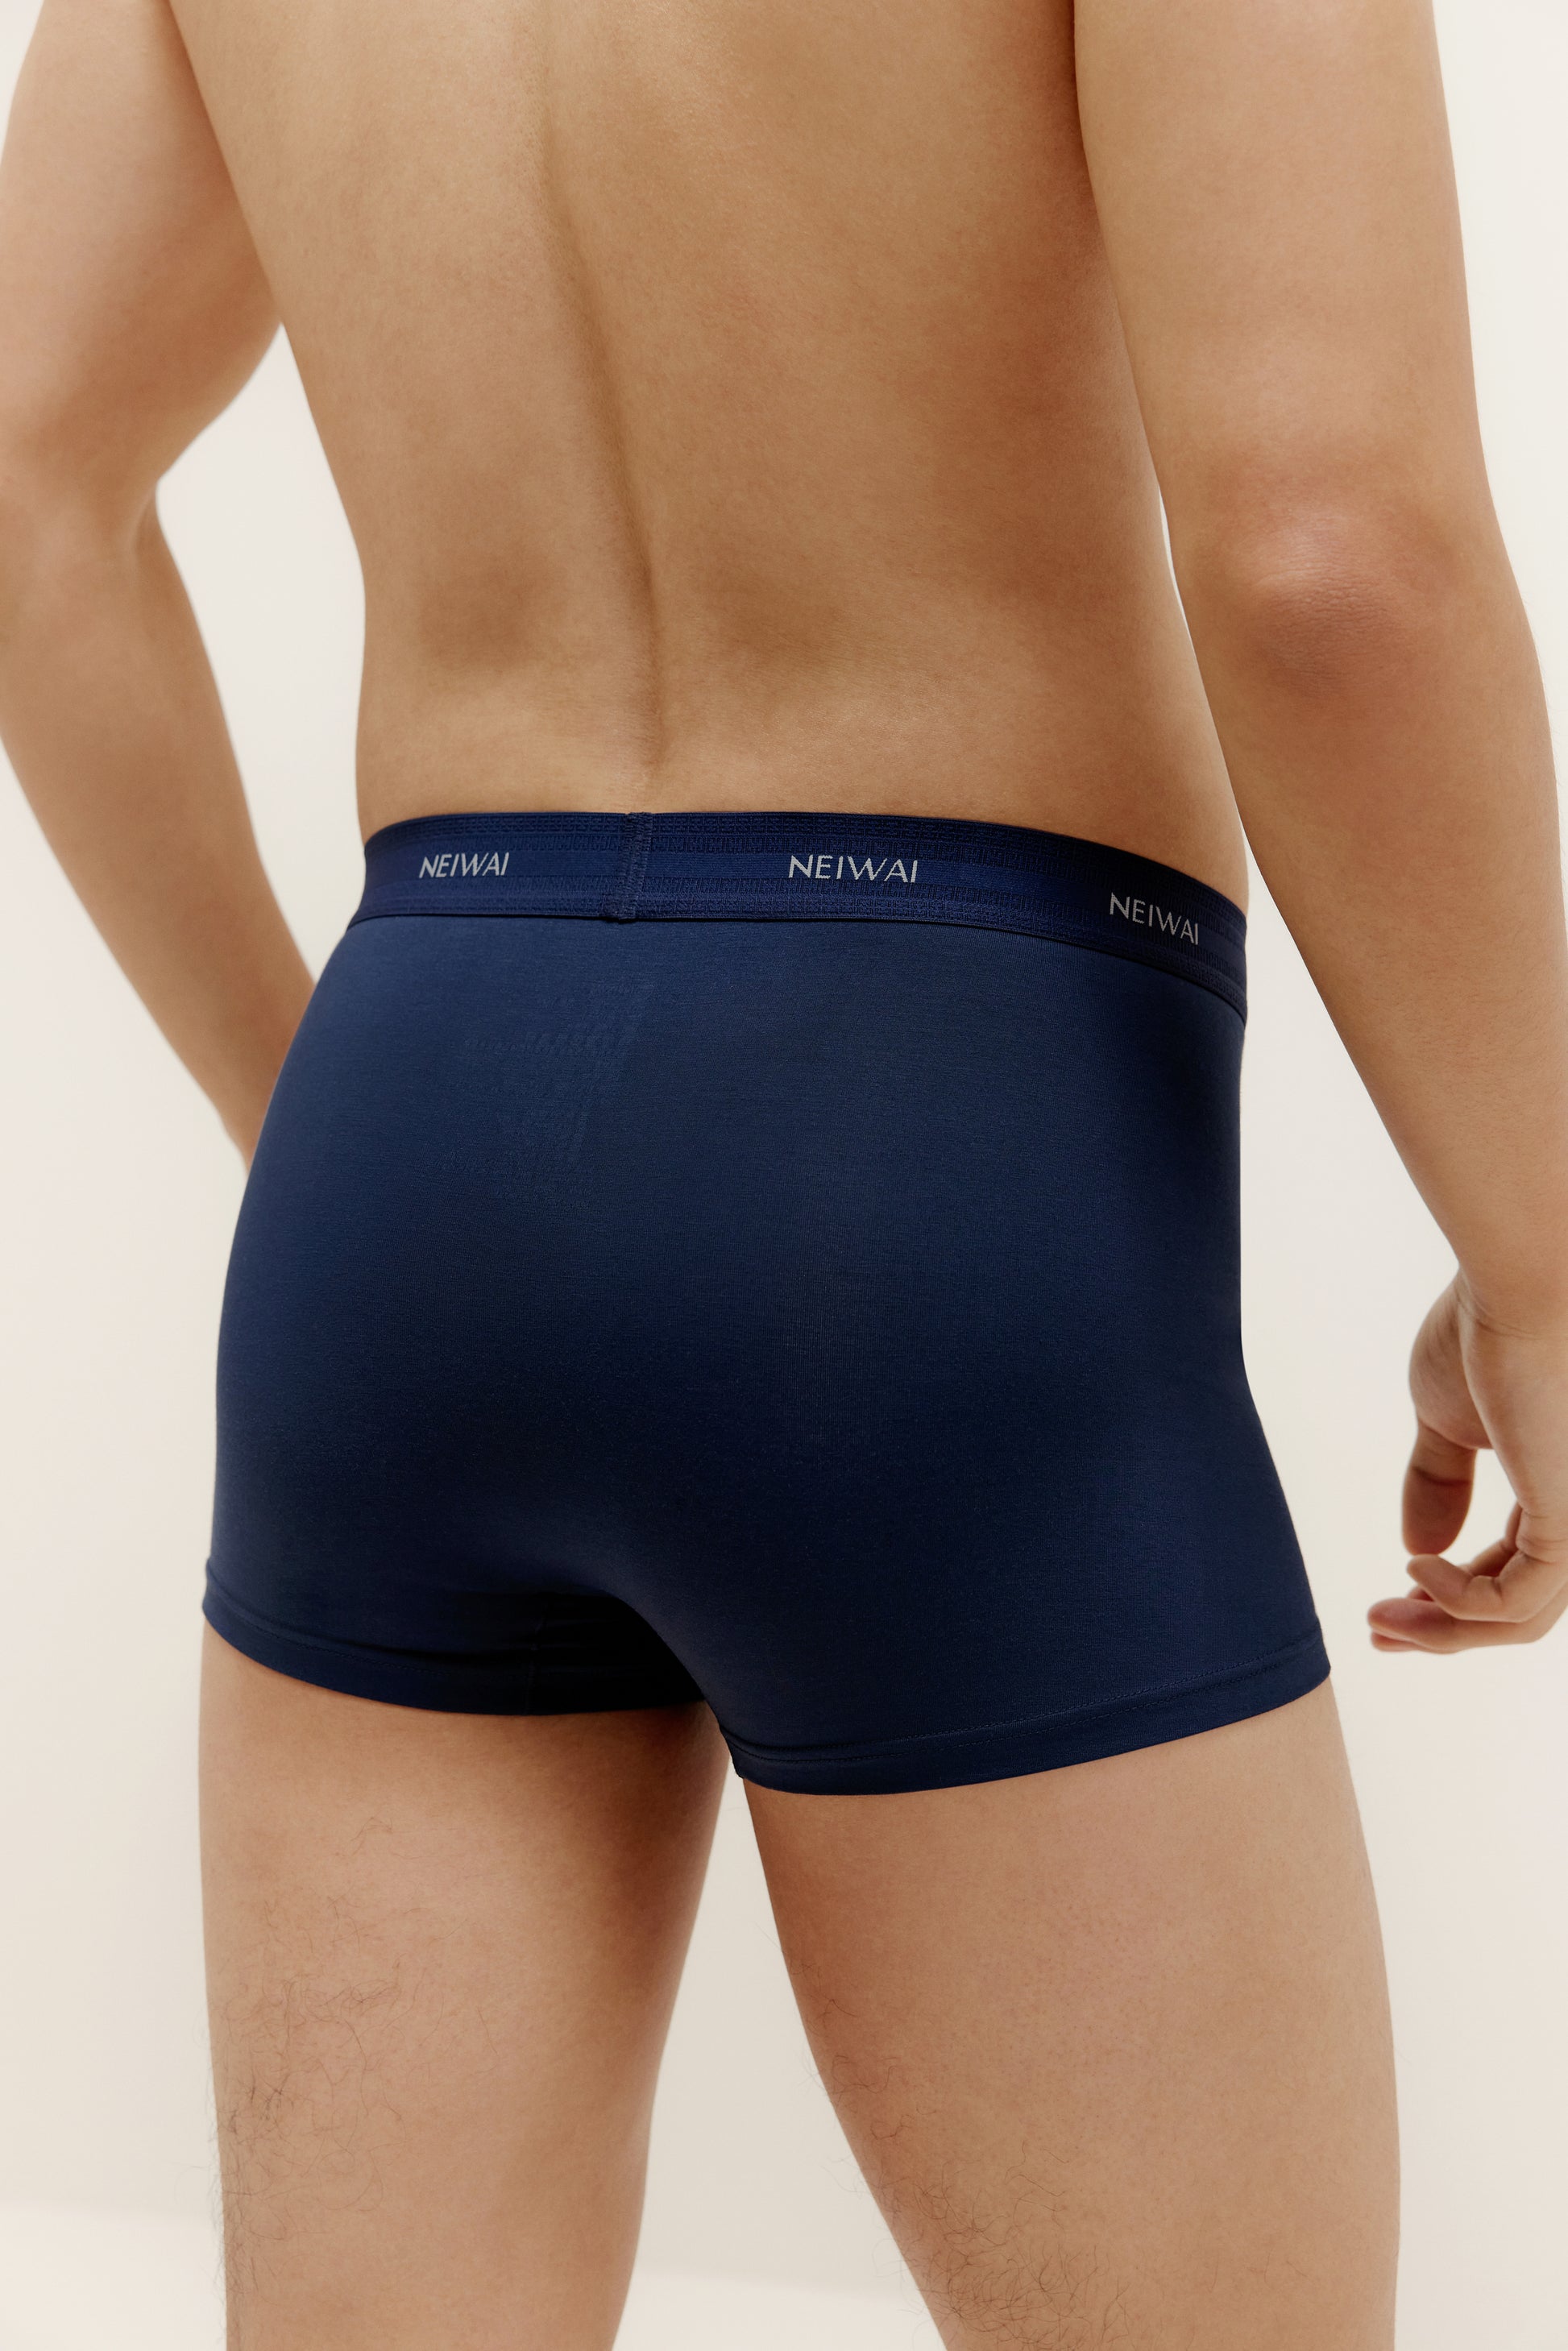 A man wearing navy brief from back